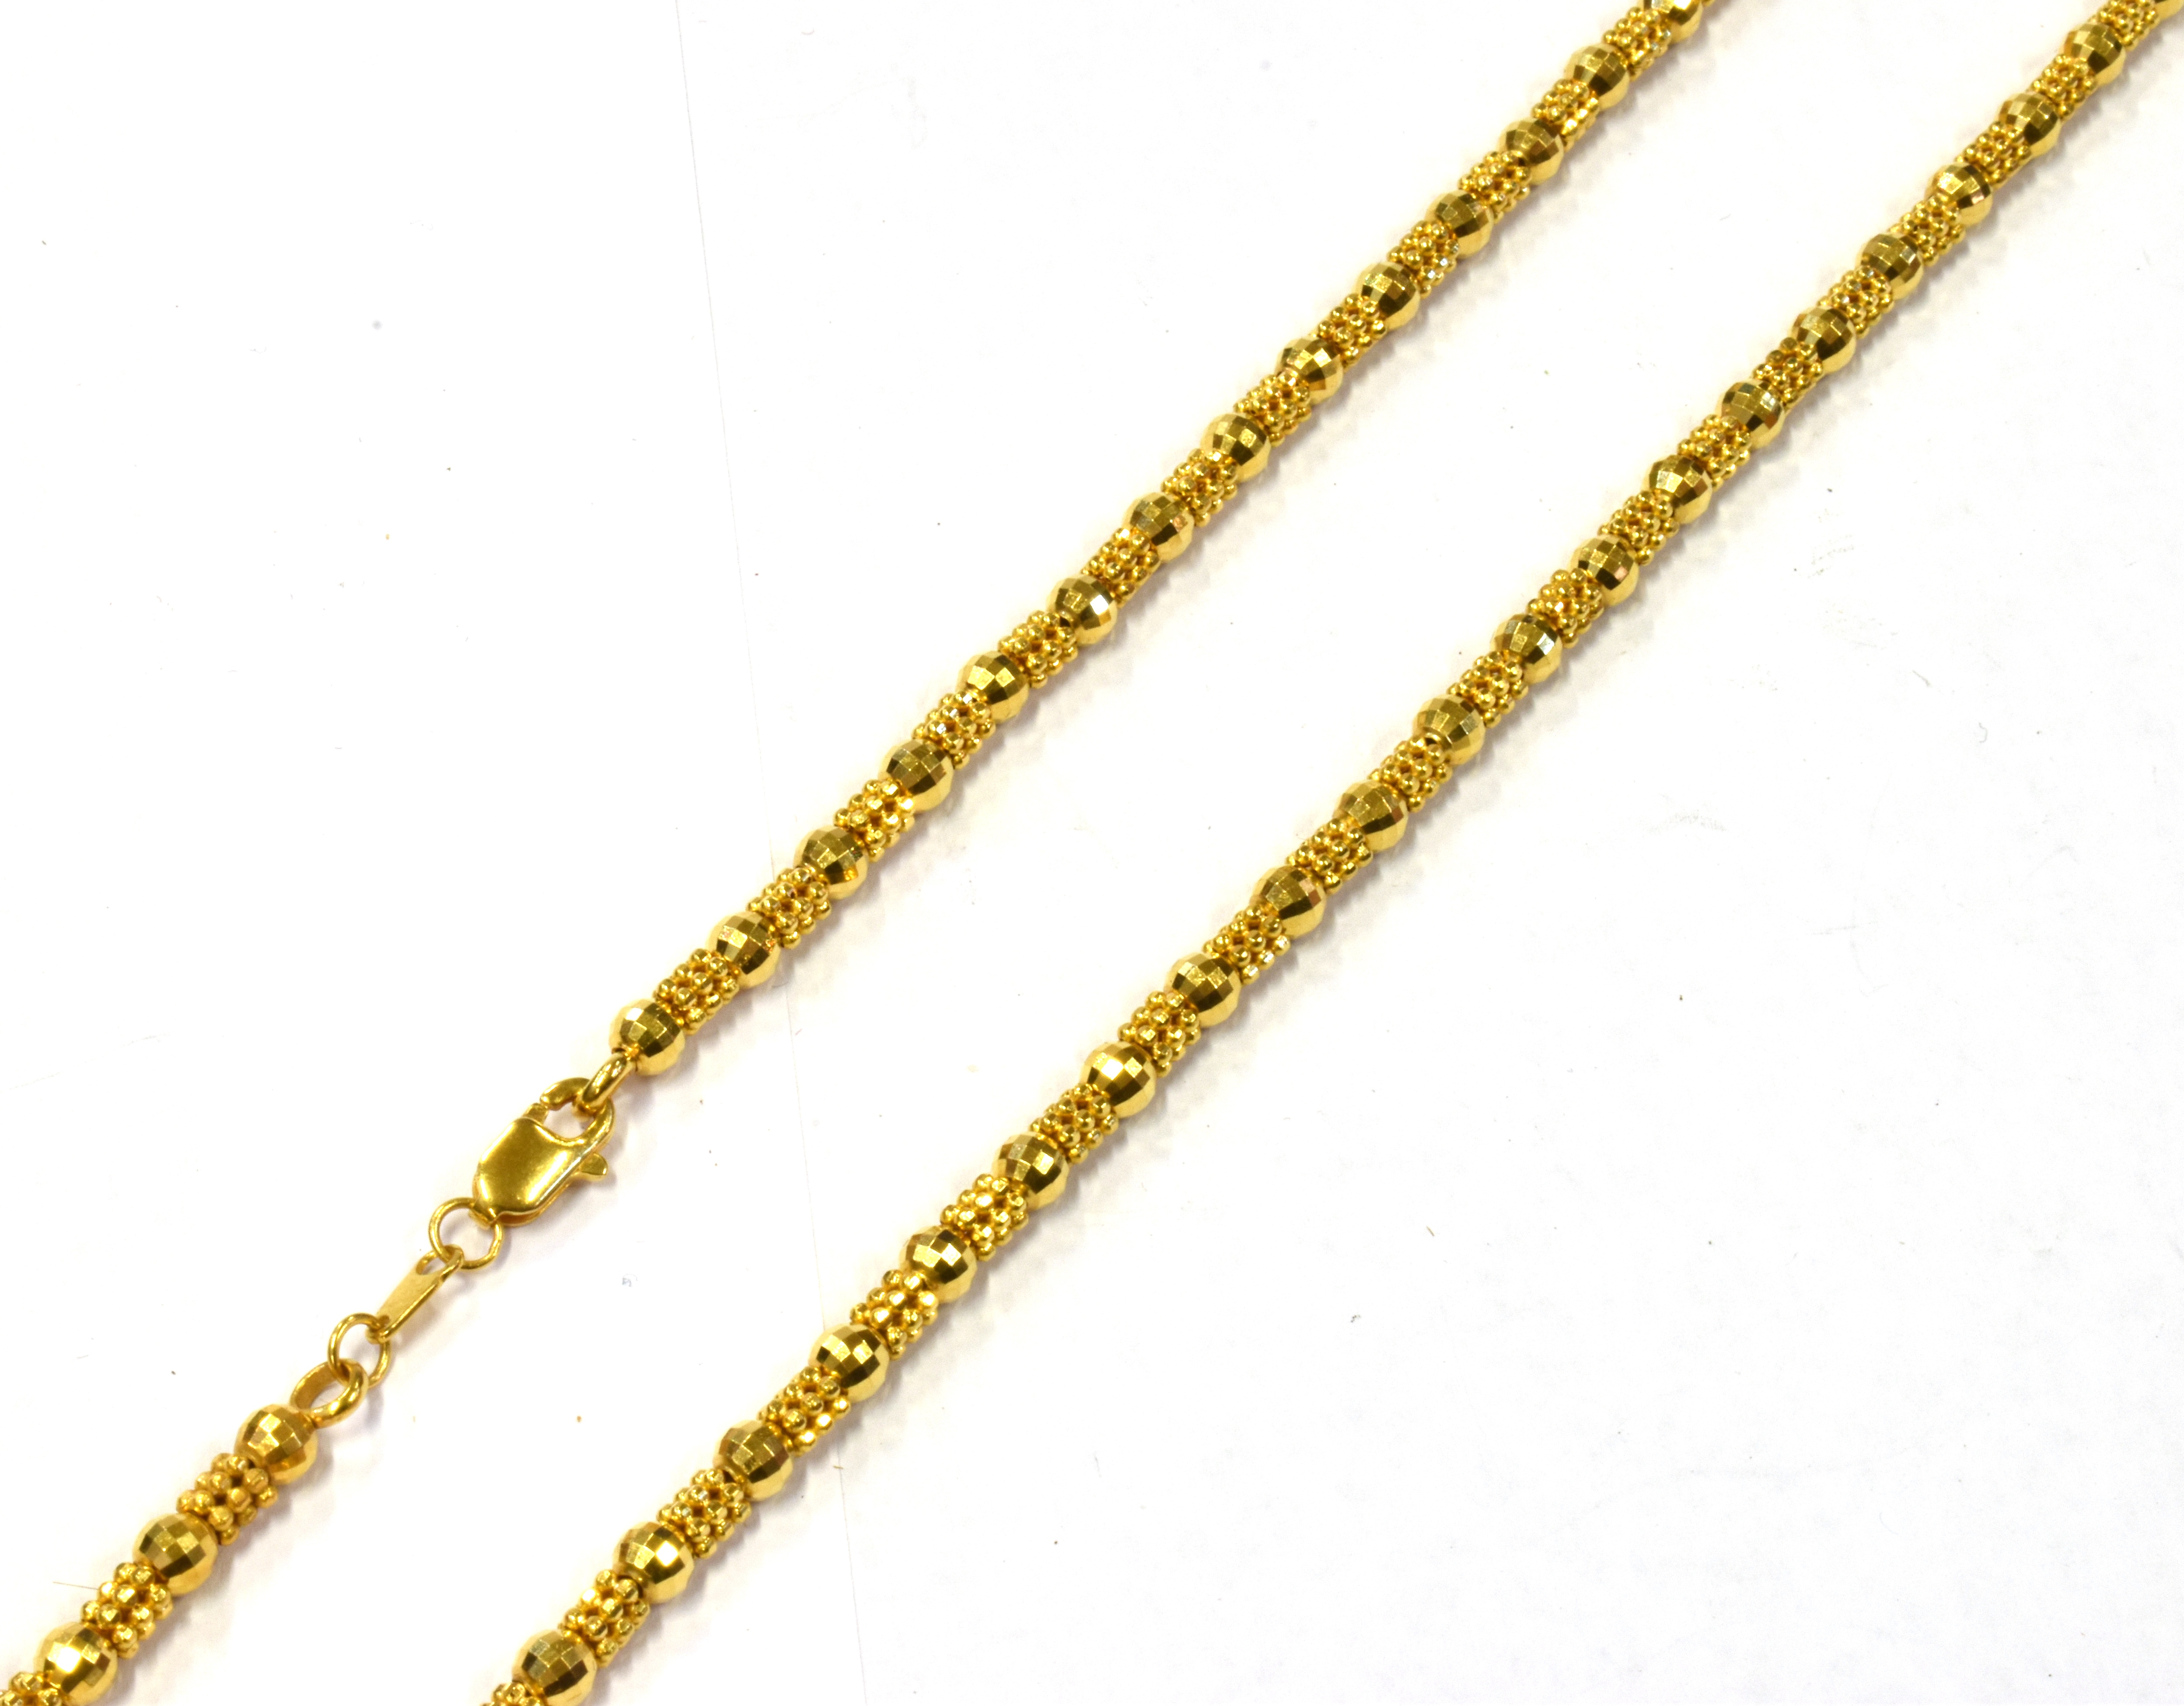 AN ARABIAN GOLD FANCY LINK NECKLACE stamped 21KT, complete with box, necklace length approx. 54cm, - Image 3 of 3